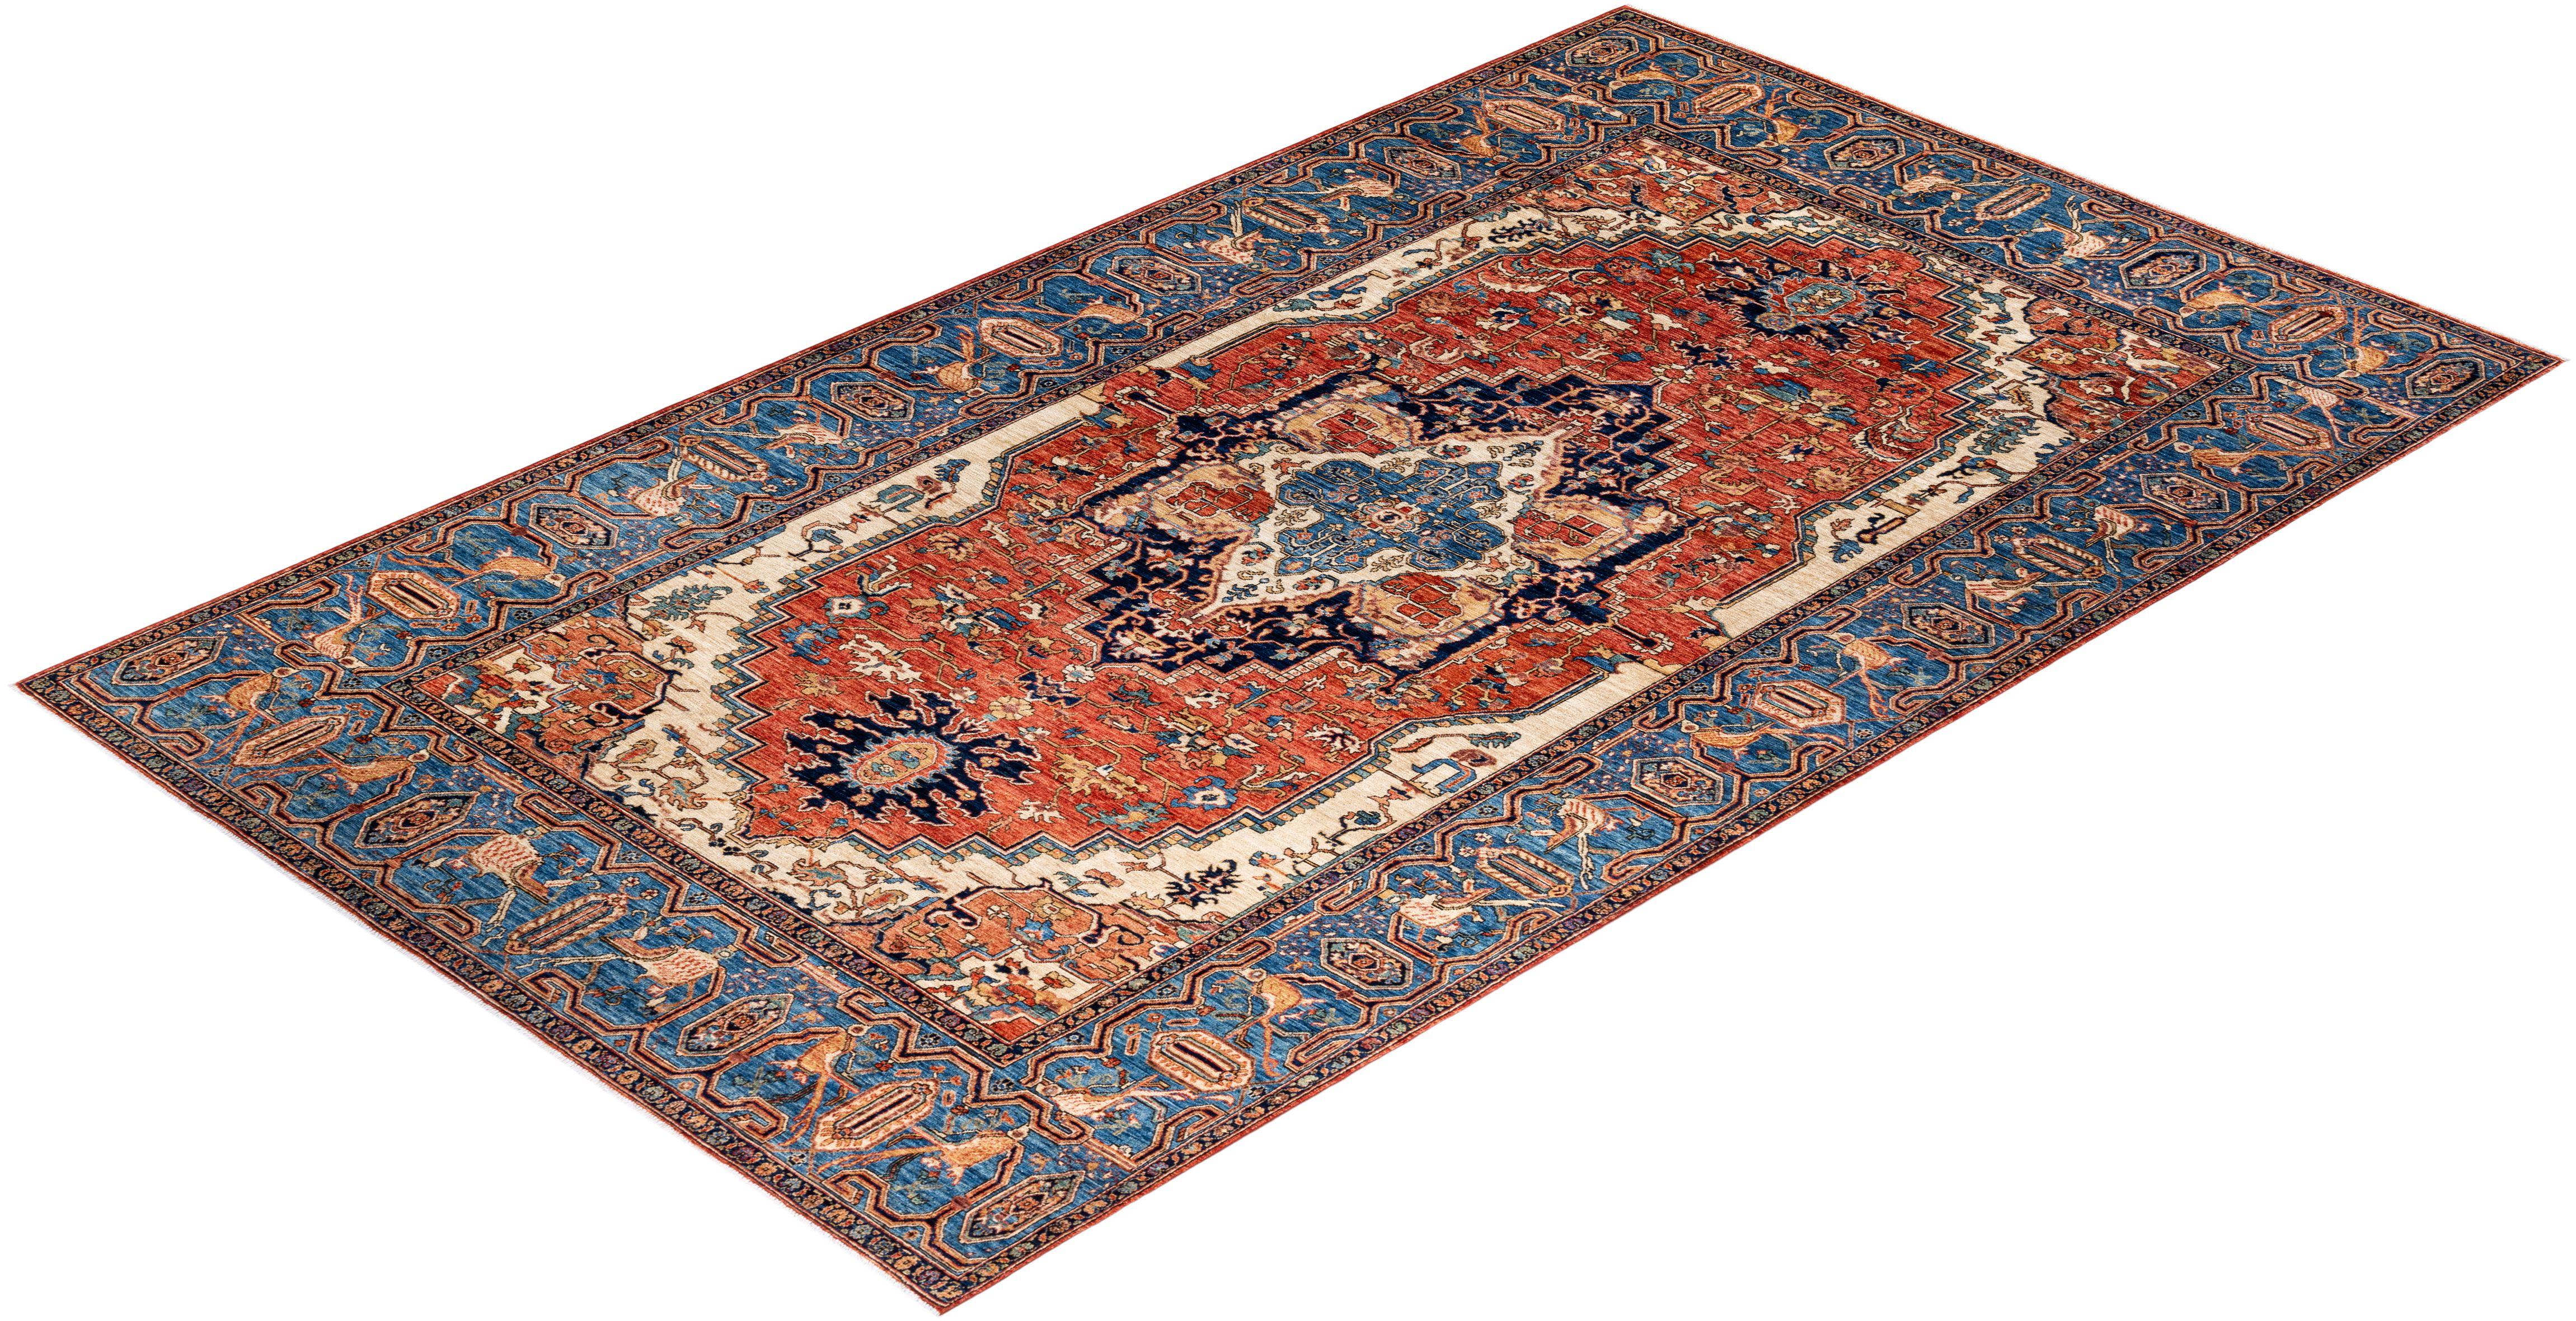 Serapi, One-of-a-kind Hand Knotted Runner Rug, Orange For Sale 1